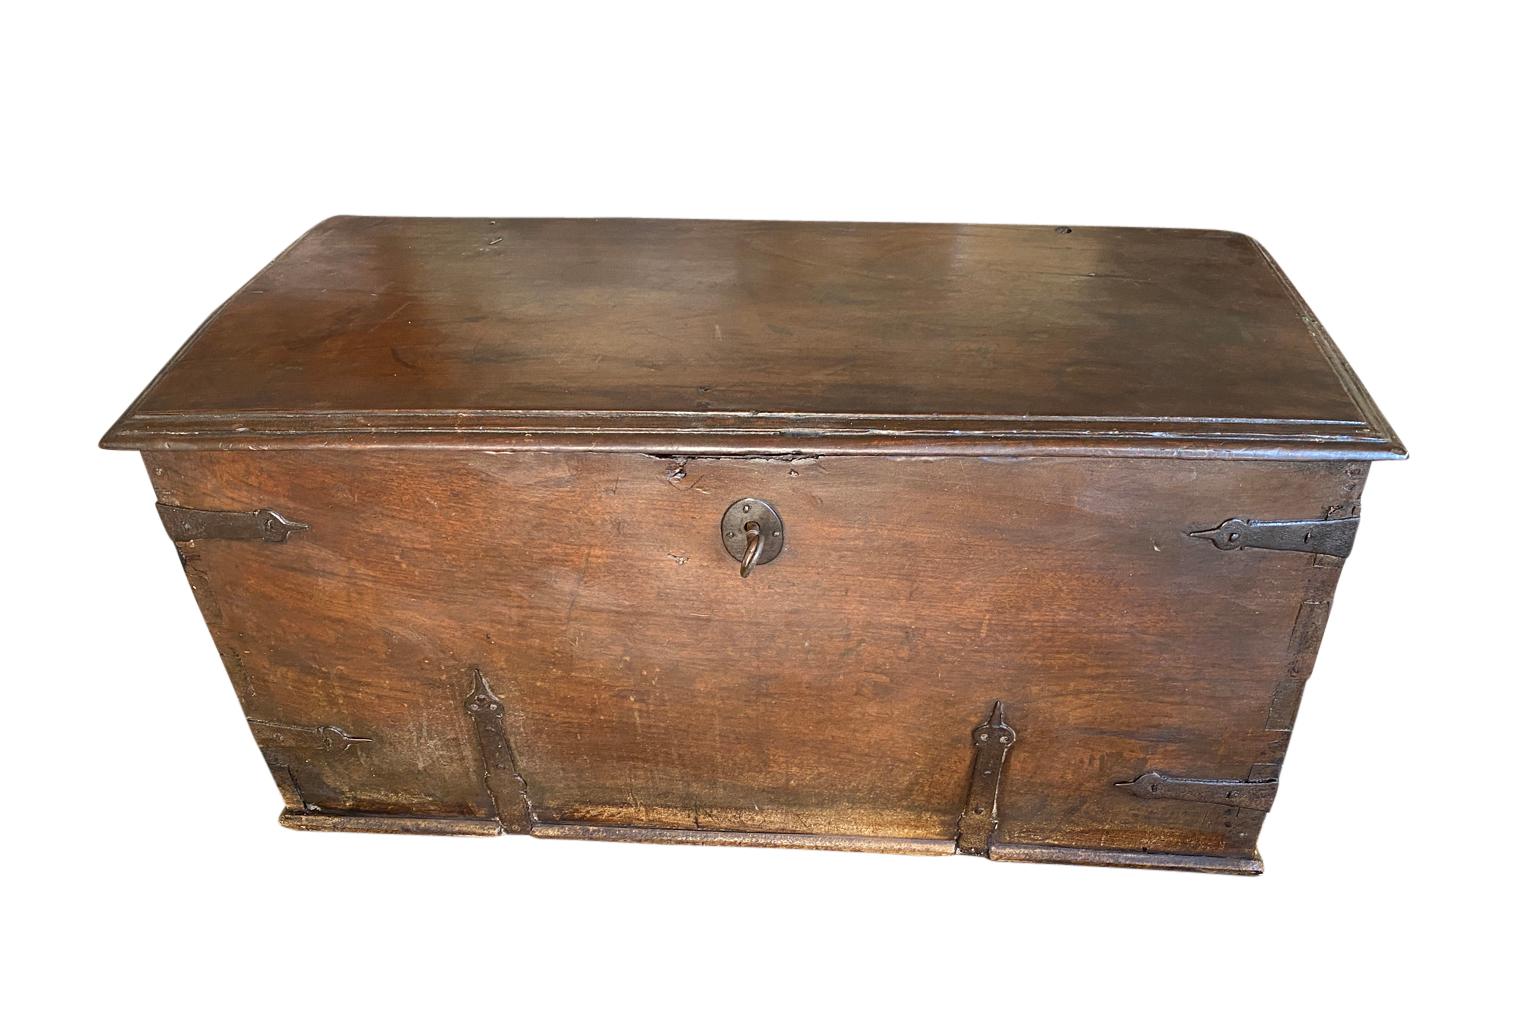 A very handsome 17th century Coffre - Trunk from the Catalan region of Spain. Wonderfully constructed with solid boards of walnut. Perfect at the base of a bed, under a picture window or behind a sofa.